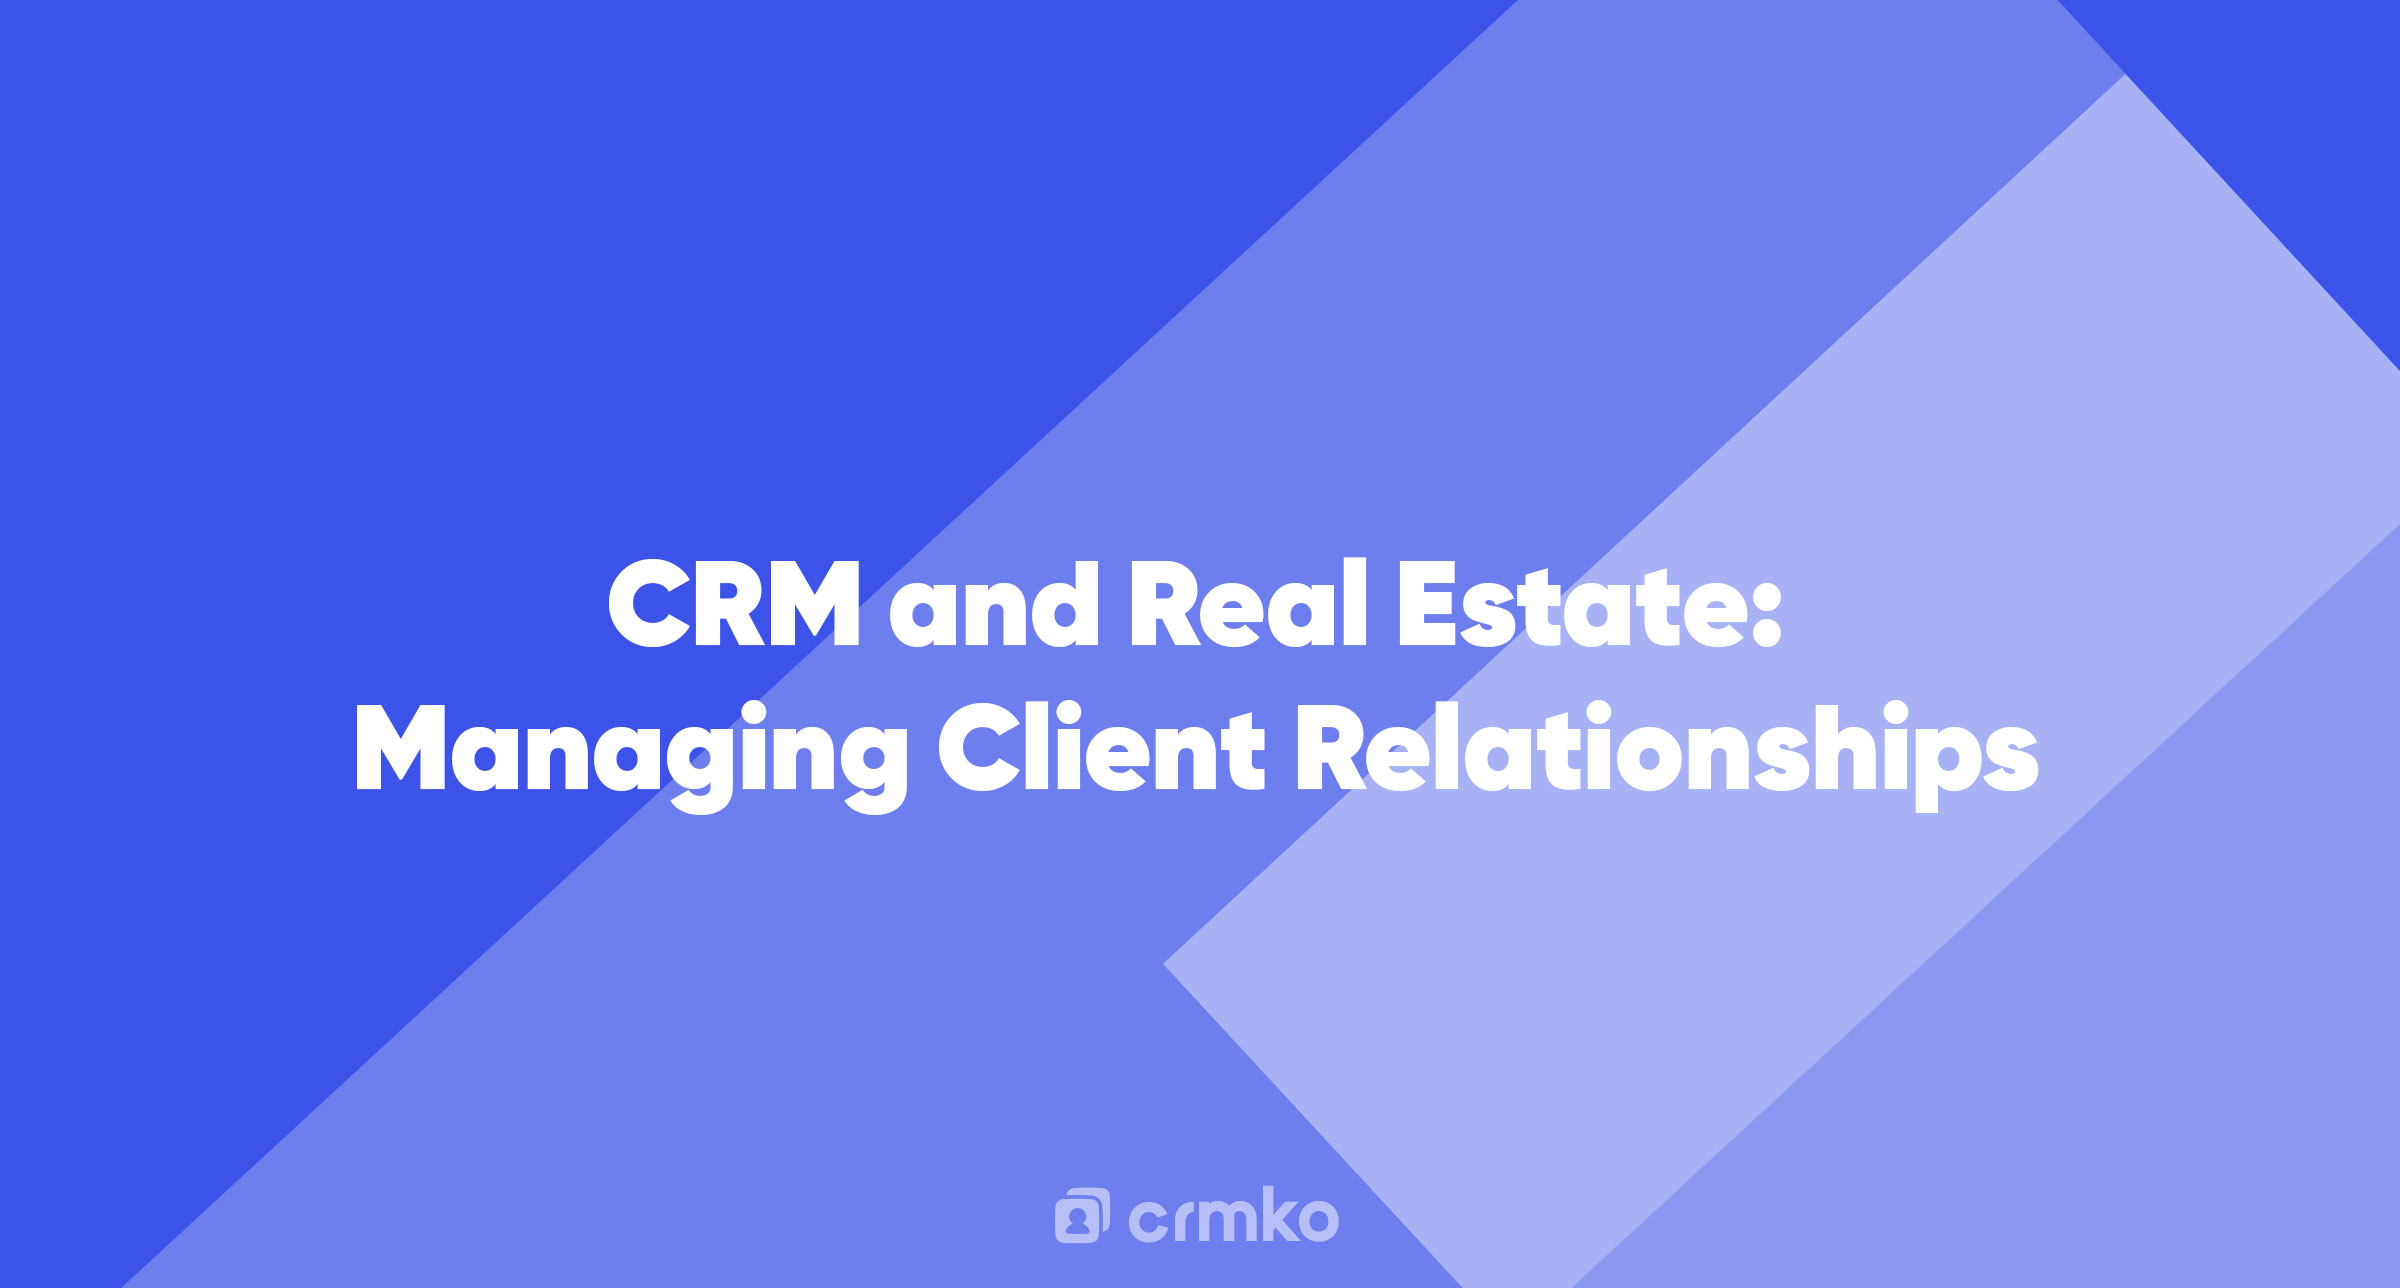 Article | CRM and Real Estate: Managing Client Relationships